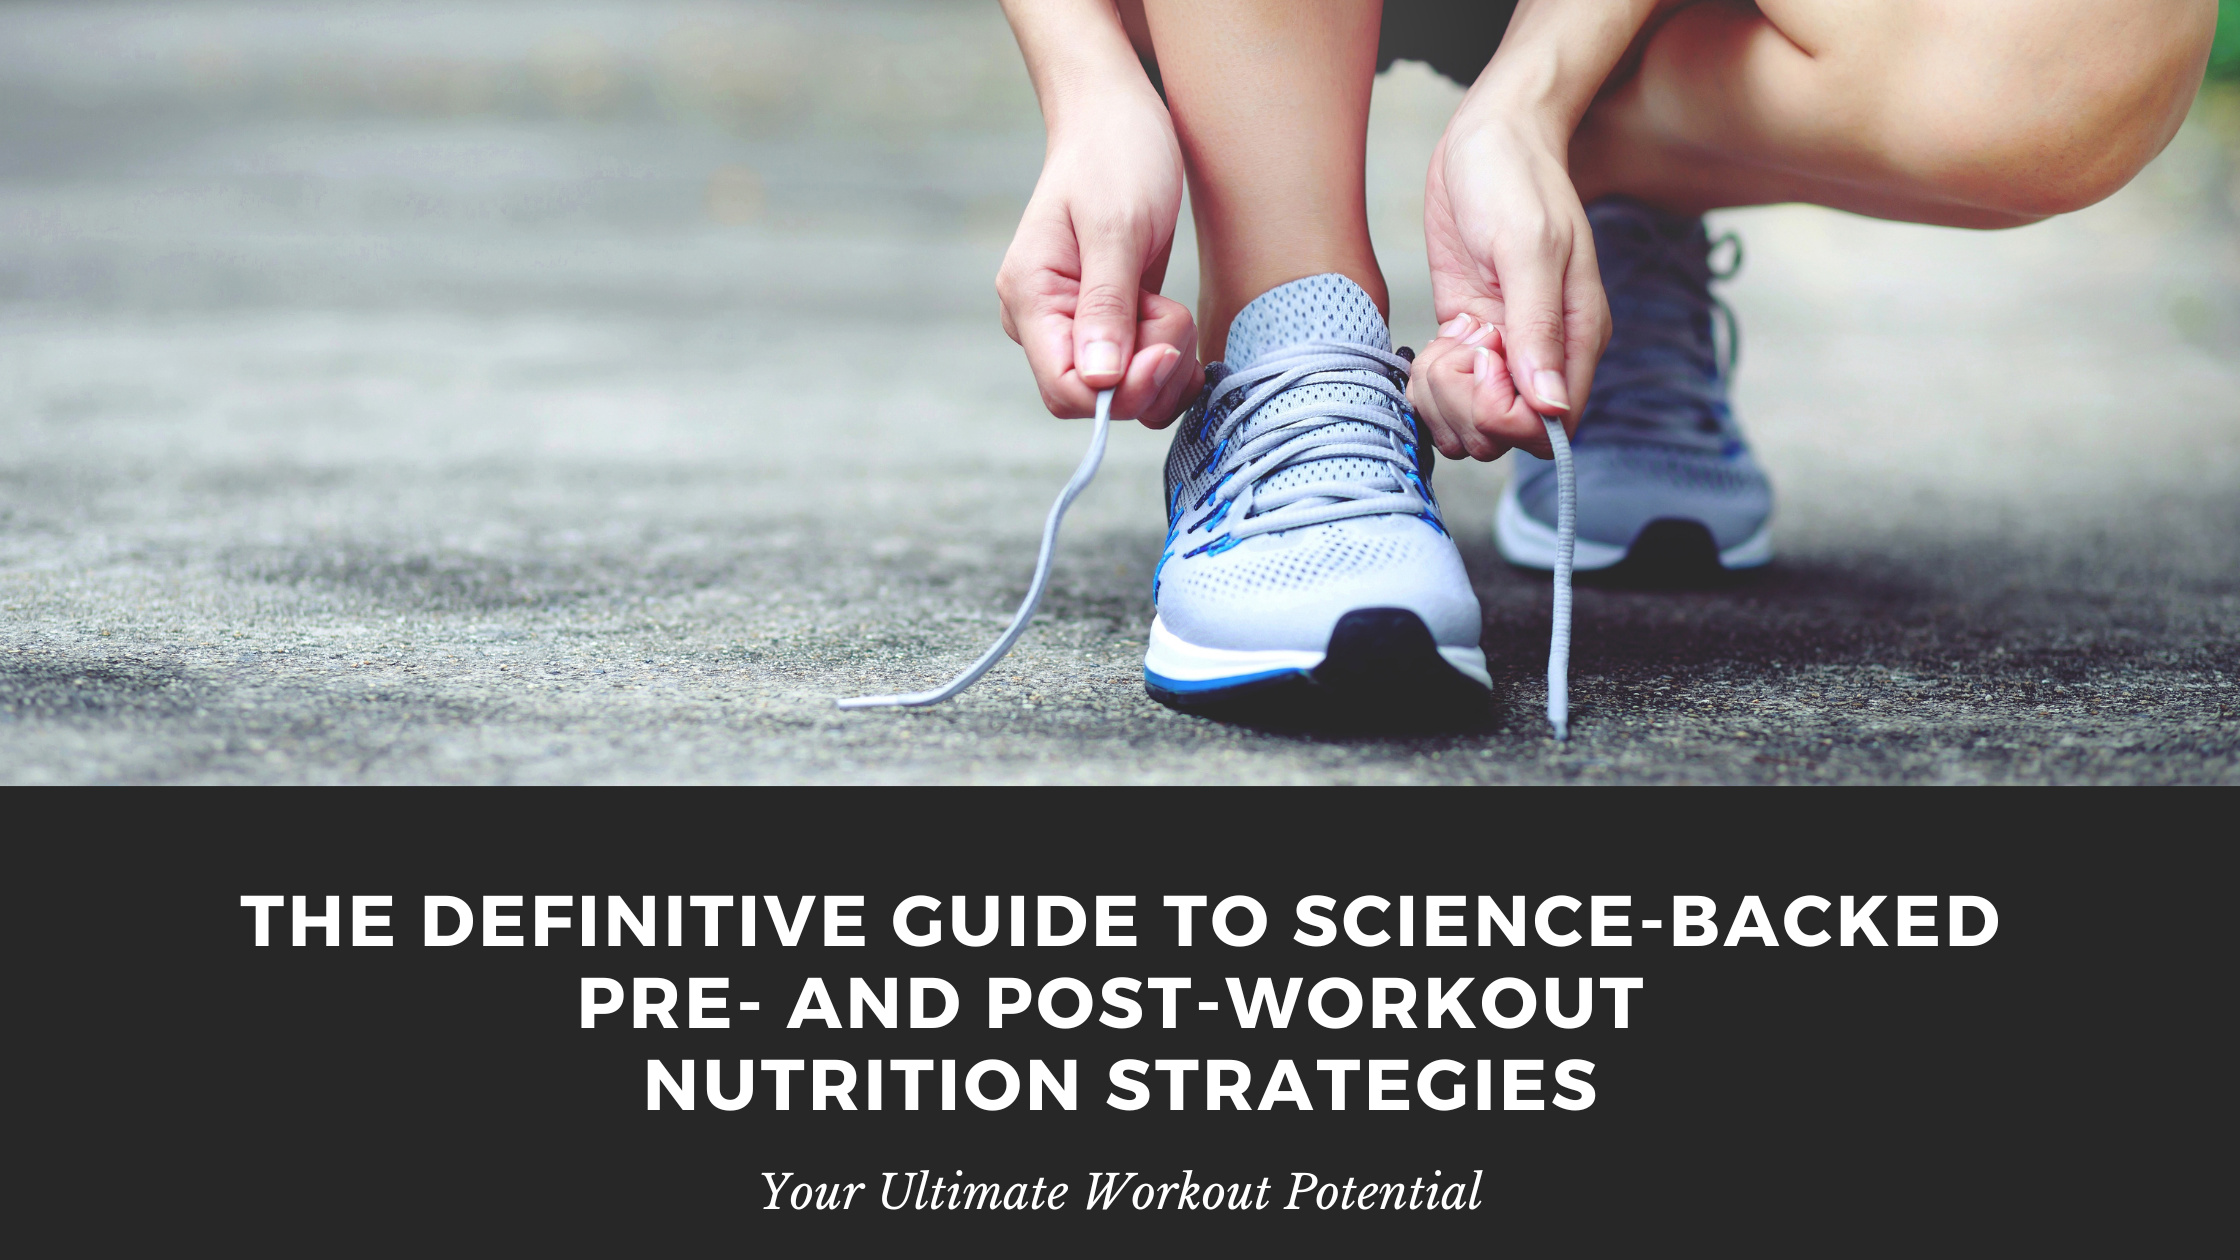 Your Ultimate Workout Potential: The Definitive Guide to Science-Backe